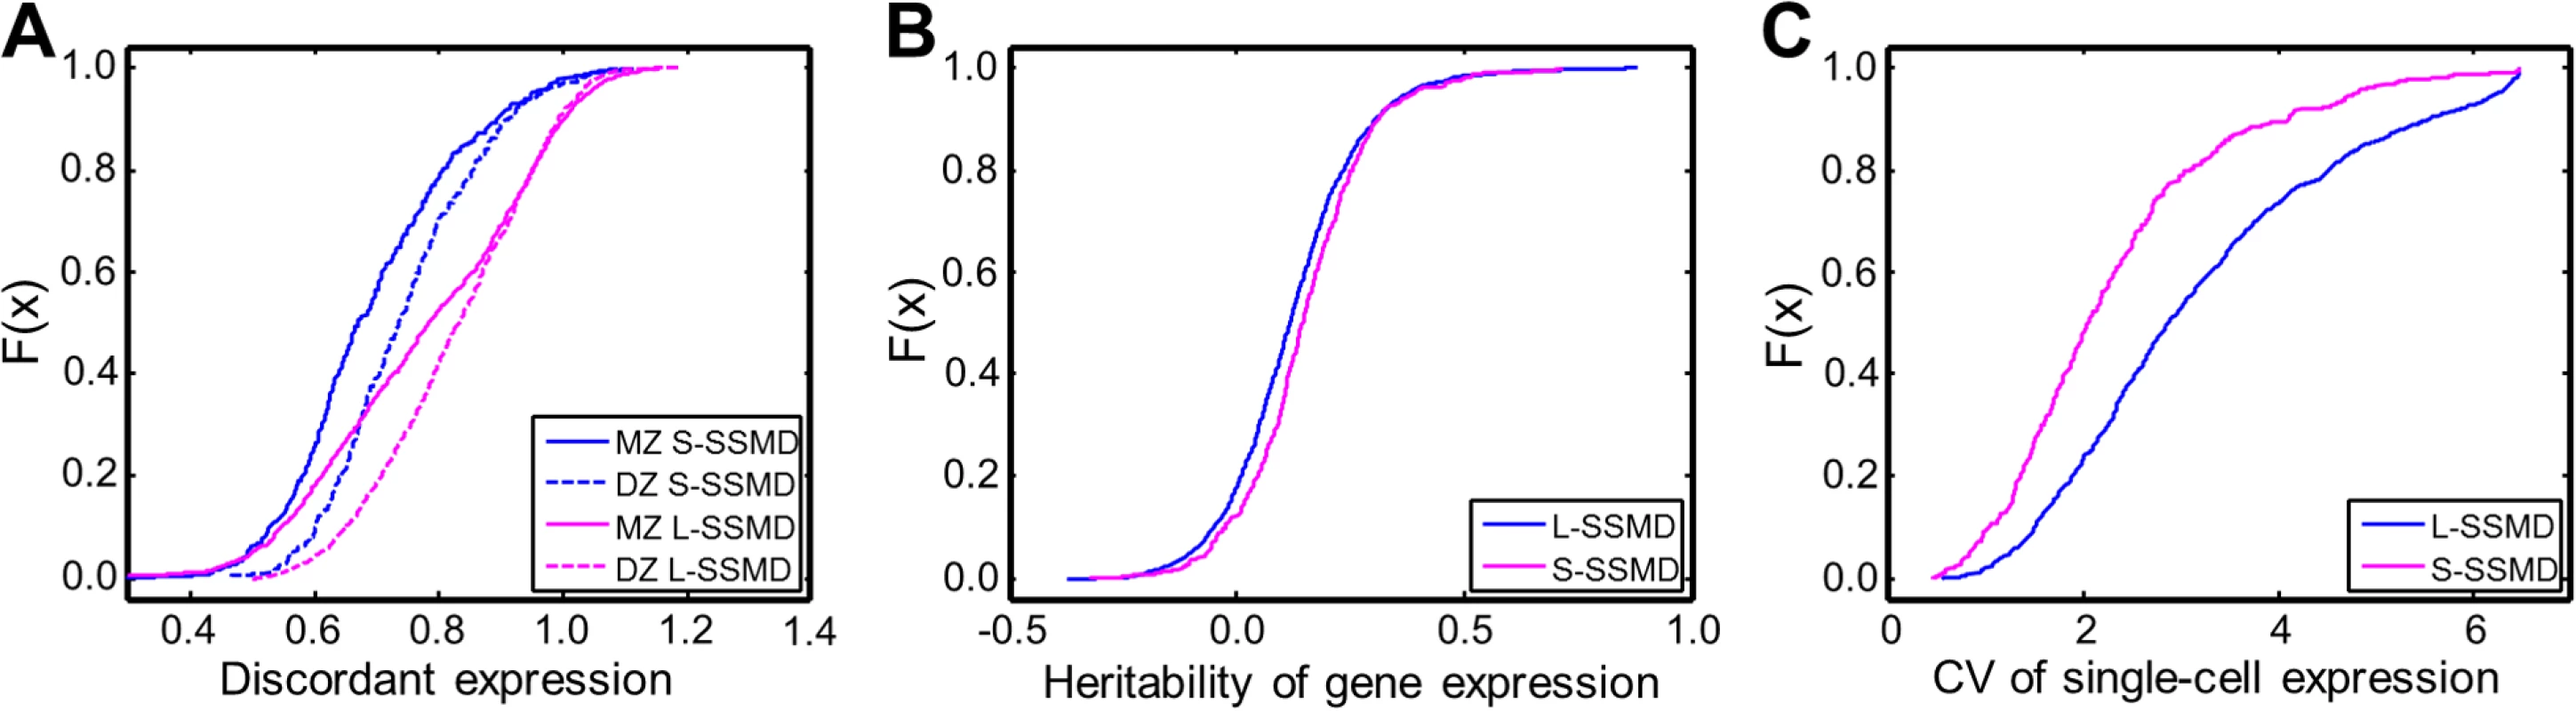 Differences in expression discordance, heritability and variability between L- and S-SSMD genes.